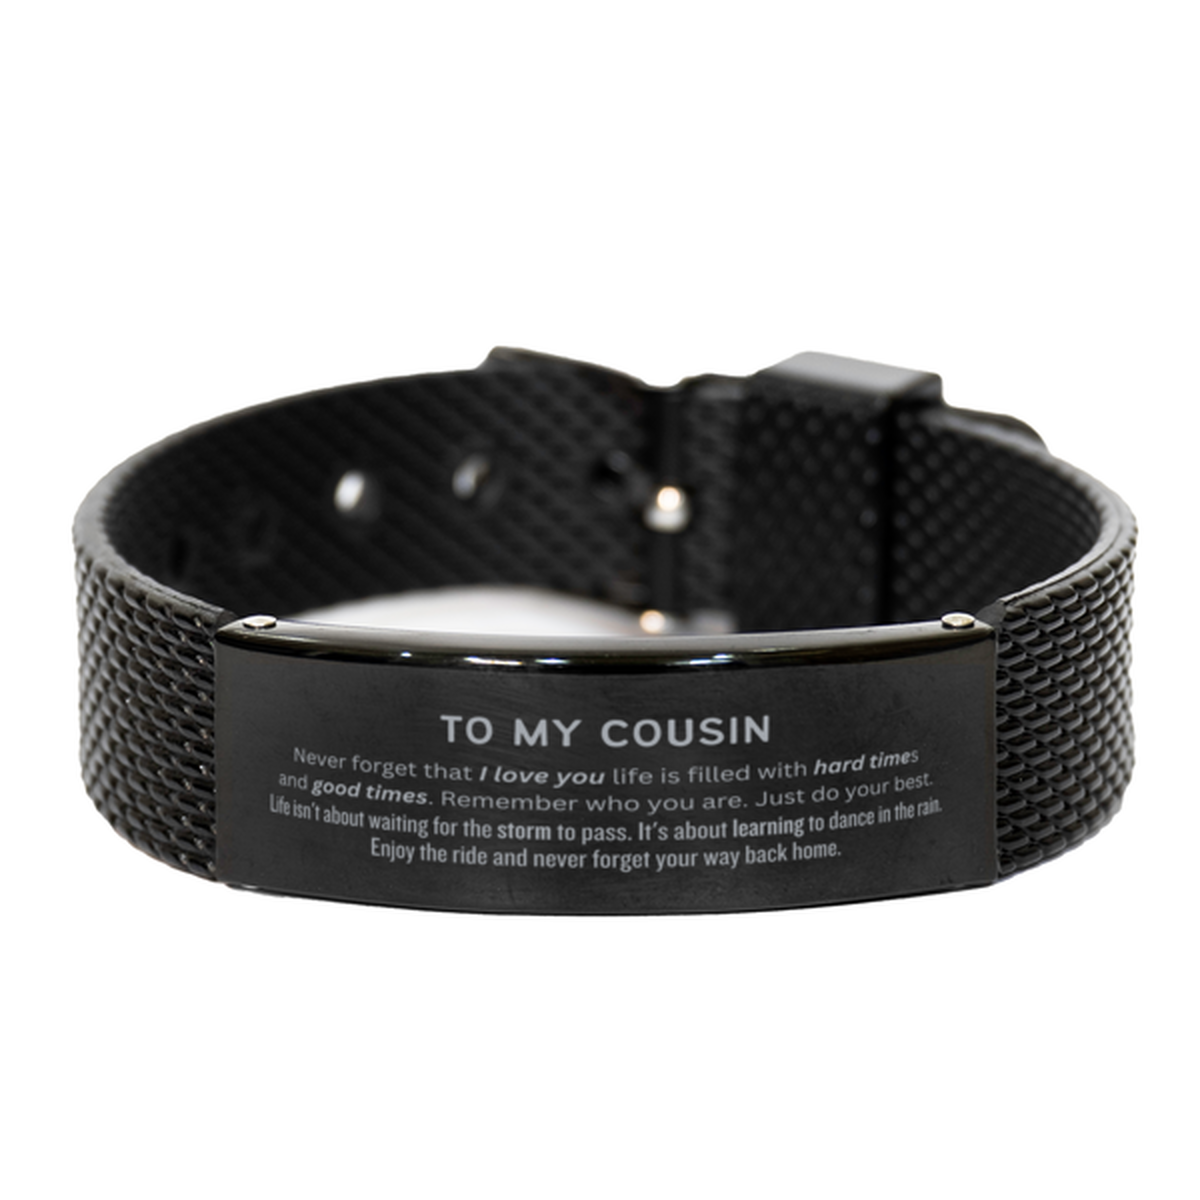 Christmas Cousin Black Shark Mesh Bracelet Gifts, To My Cousin Birthday Thank You Gifts For Cousin, Graduation Unique Gifts For Cousin To My Cousin Never forget that I love you life is filled with hard times and good times. Remember who you are. Just do y